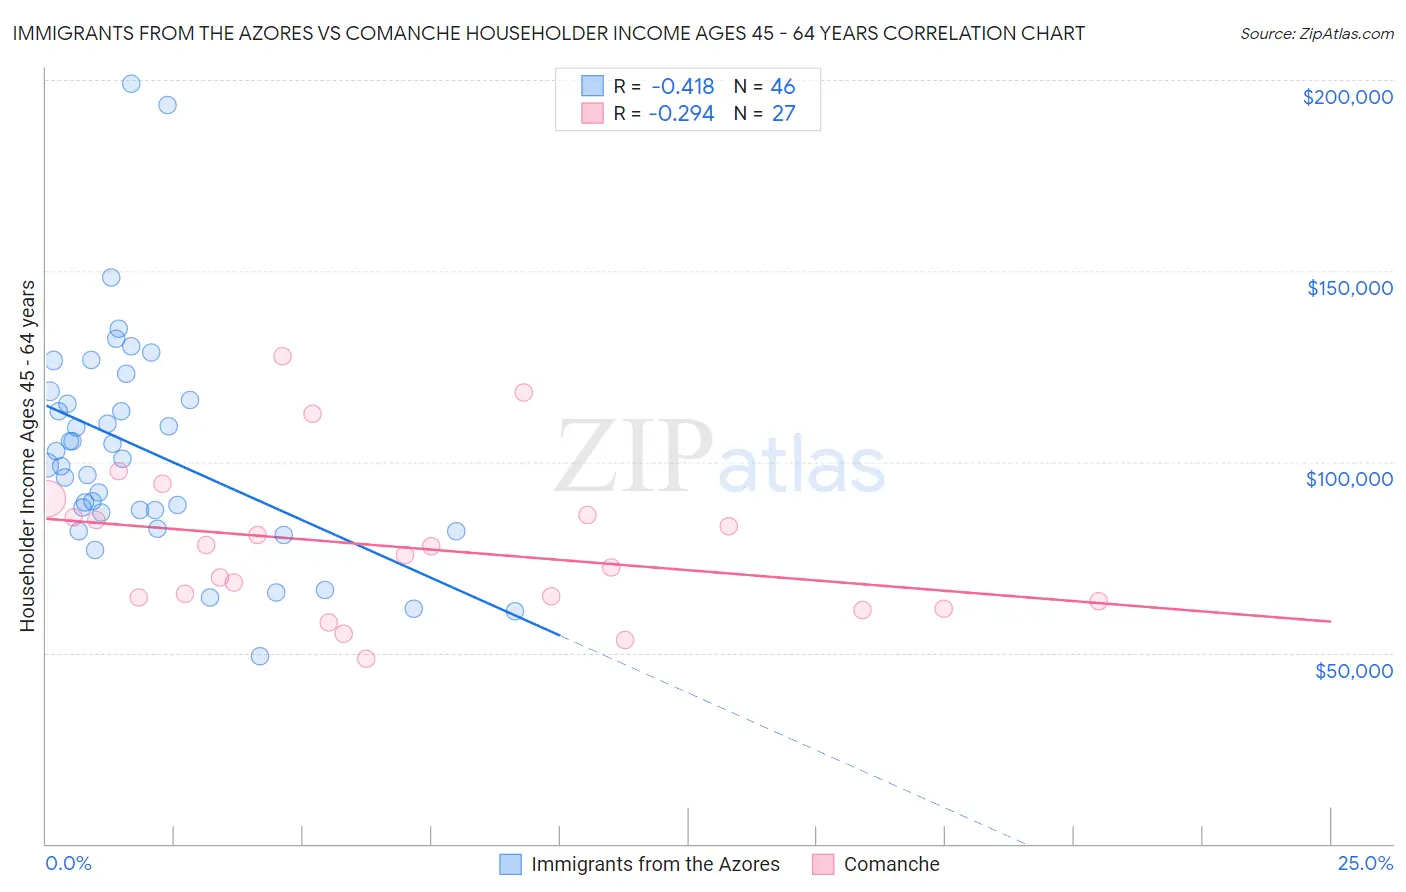 Immigrants from the Azores vs Comanche Householder Income Ages 45 - 64 years